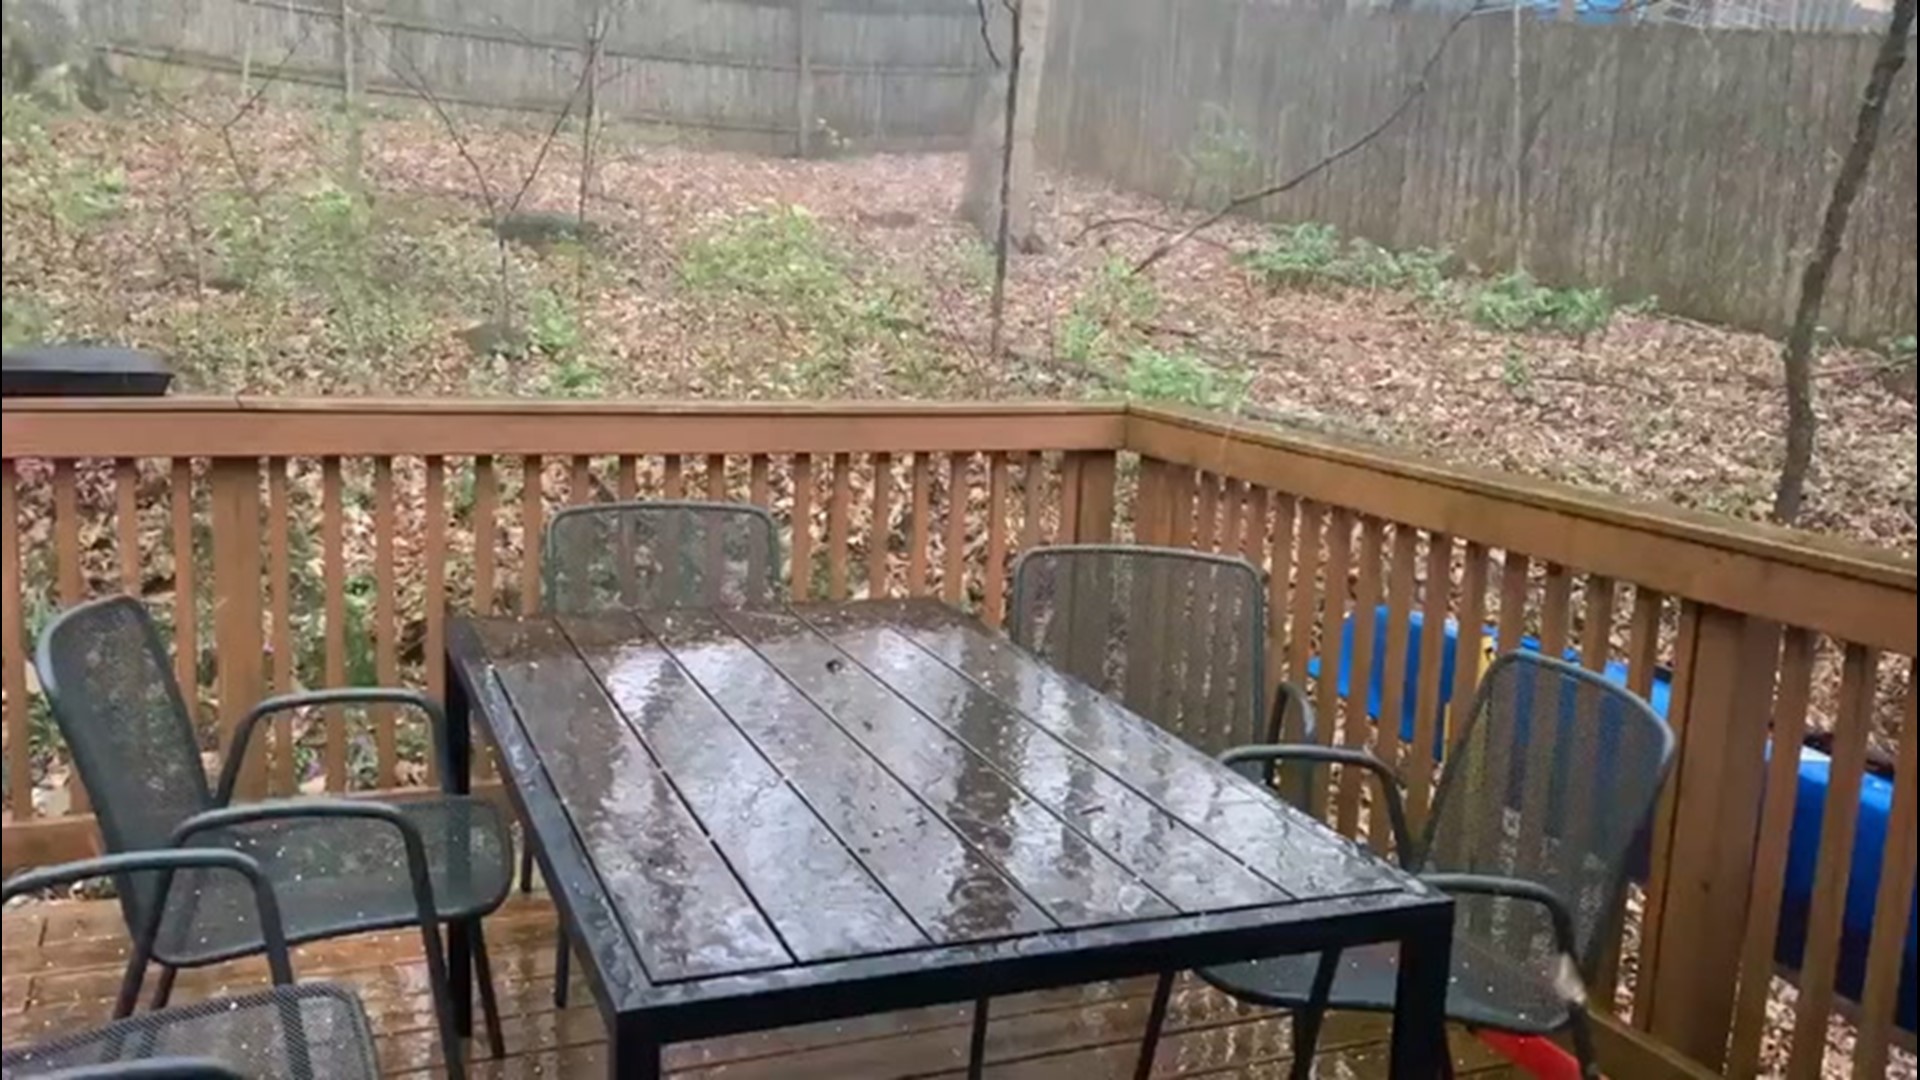 A severe thunderstorm warning made for stormy conditions with small hail and gusty winds in Blacksburg, Virginia, on April 8.